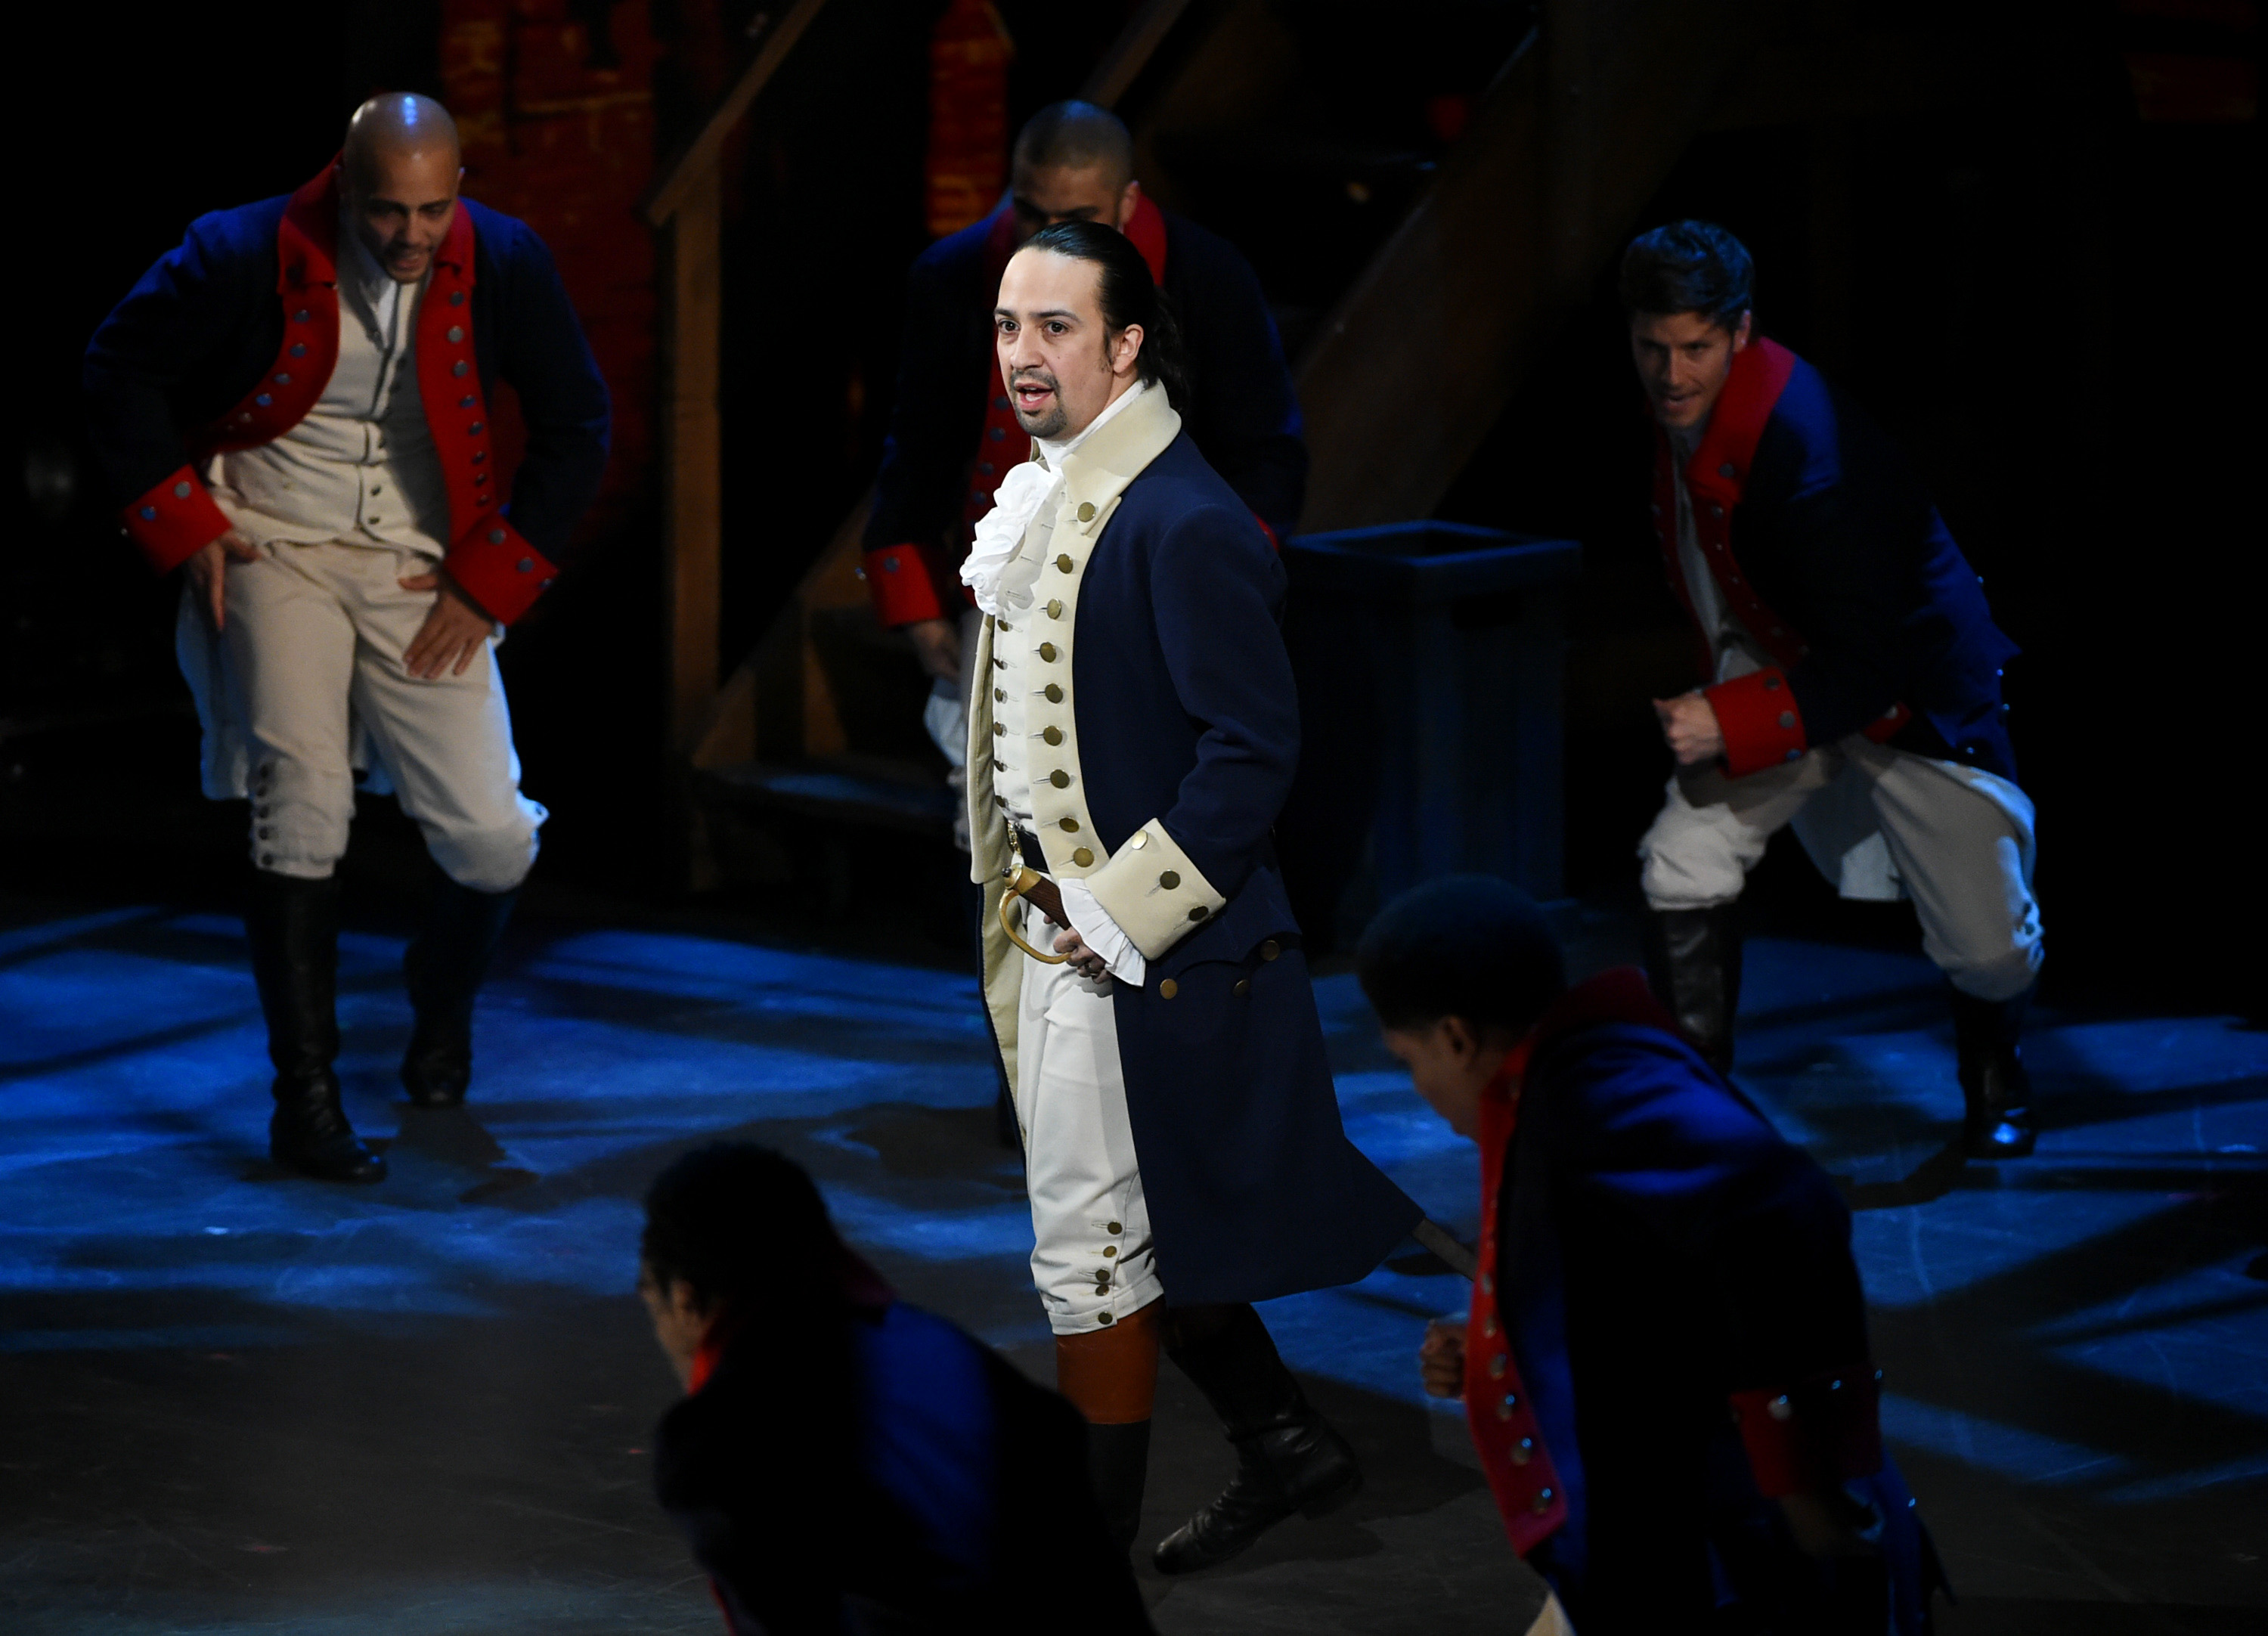 Actor Lin- Manuel Miranda of "Hamilton" performs at the Tony Awards at the Beacon Theatre on Sunday, June 12, 2016, in New York. (Photo by Evan Agostini/Invision/AP)